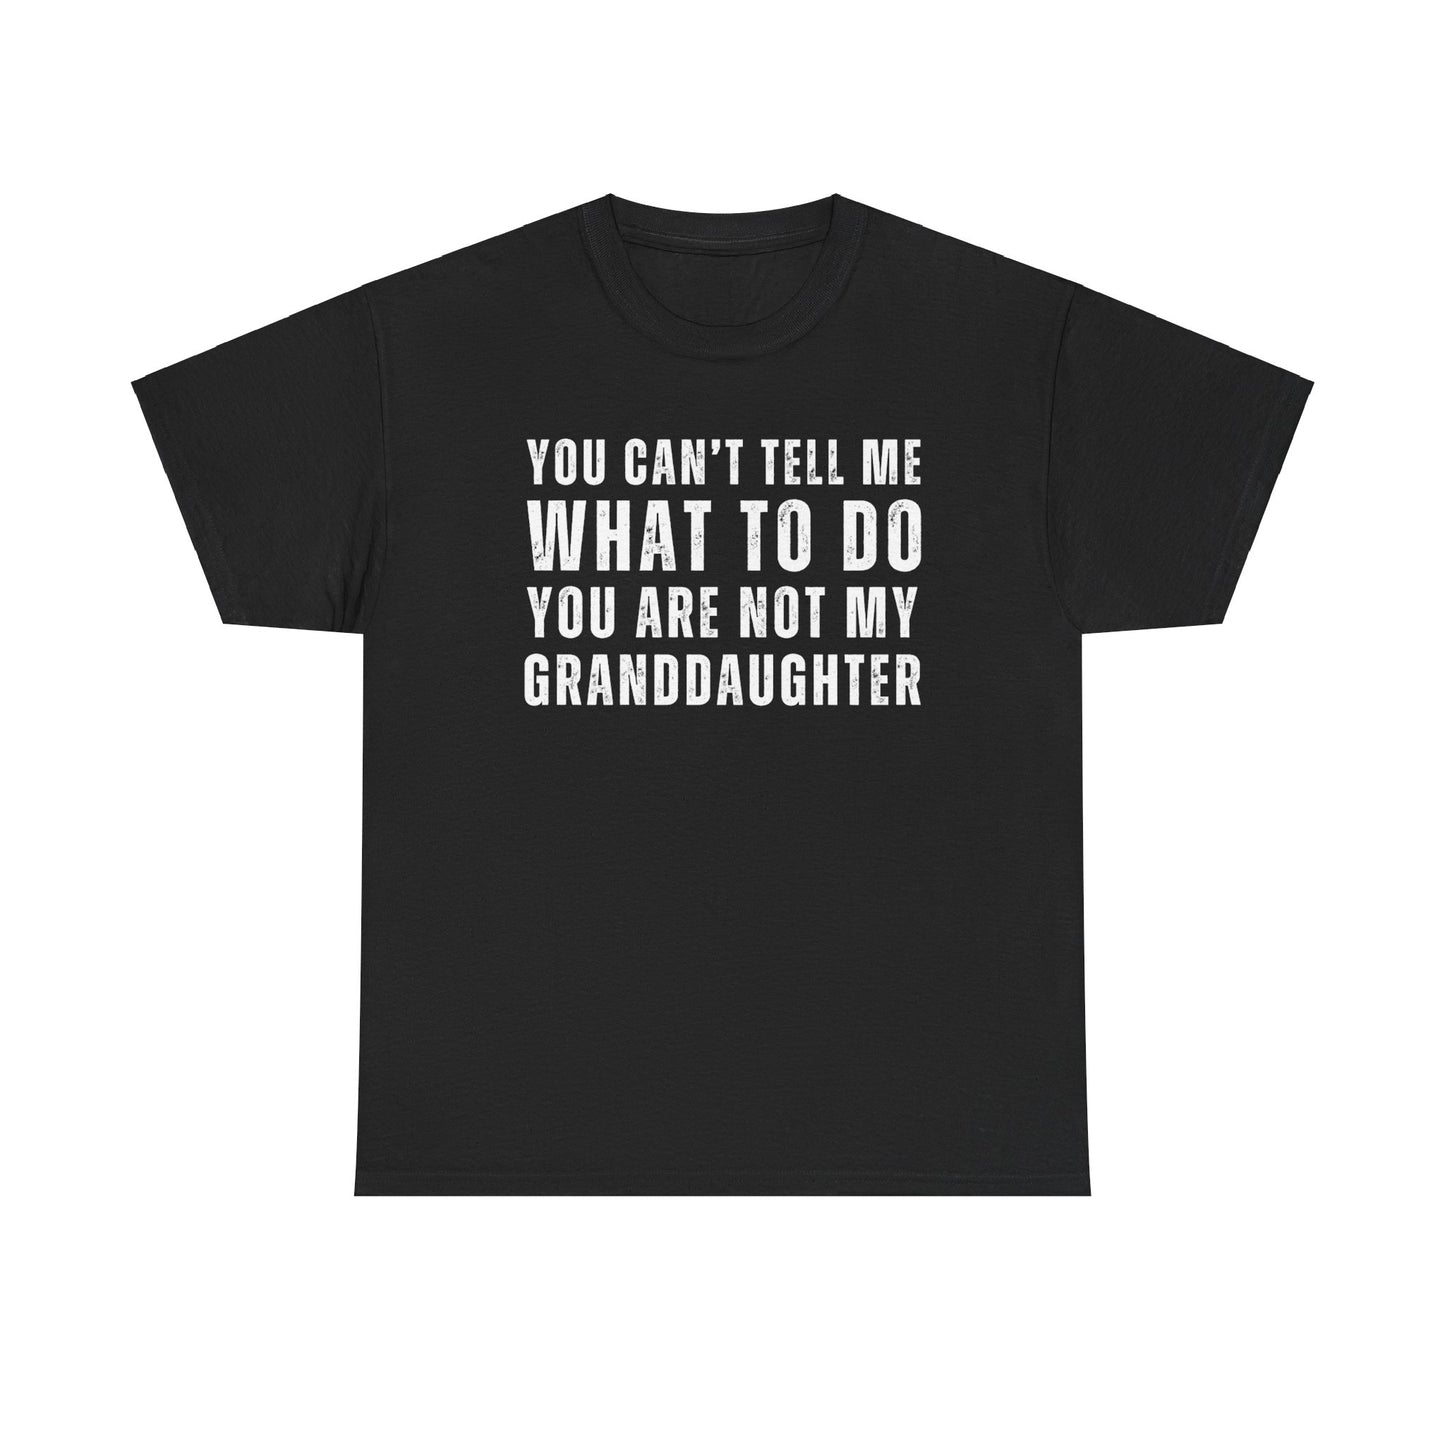 You Cant Tell Me What To Do Tshirt, Birthday Tshirt for Her